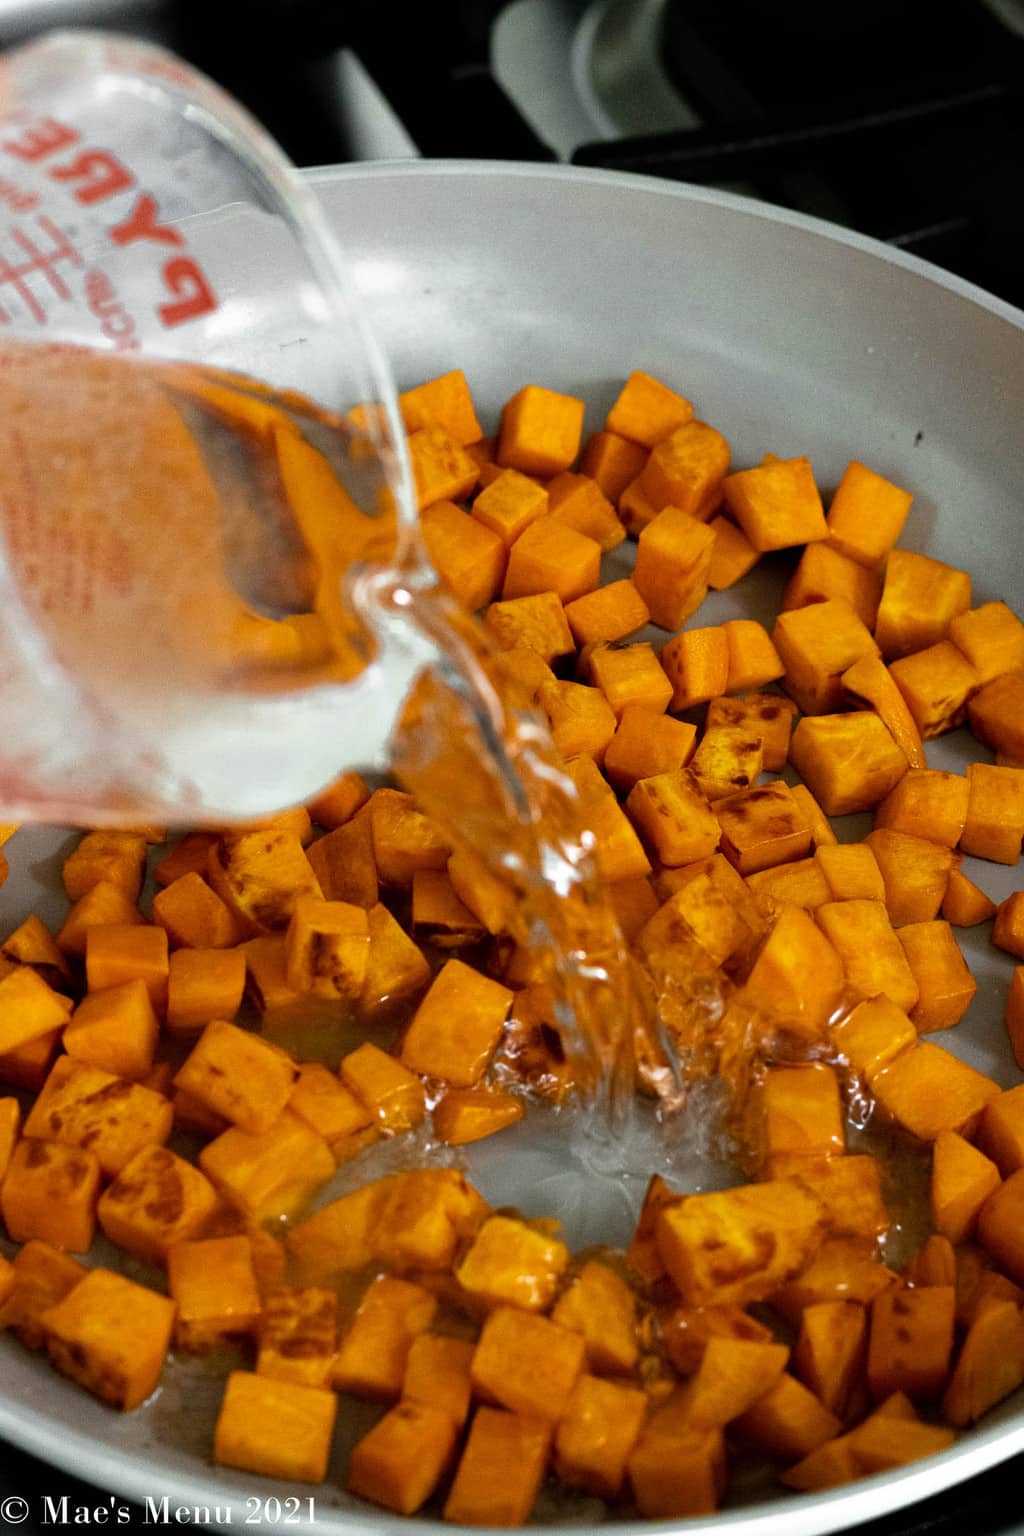 Pouring water in with the pan with the cooking sweet potatoes.